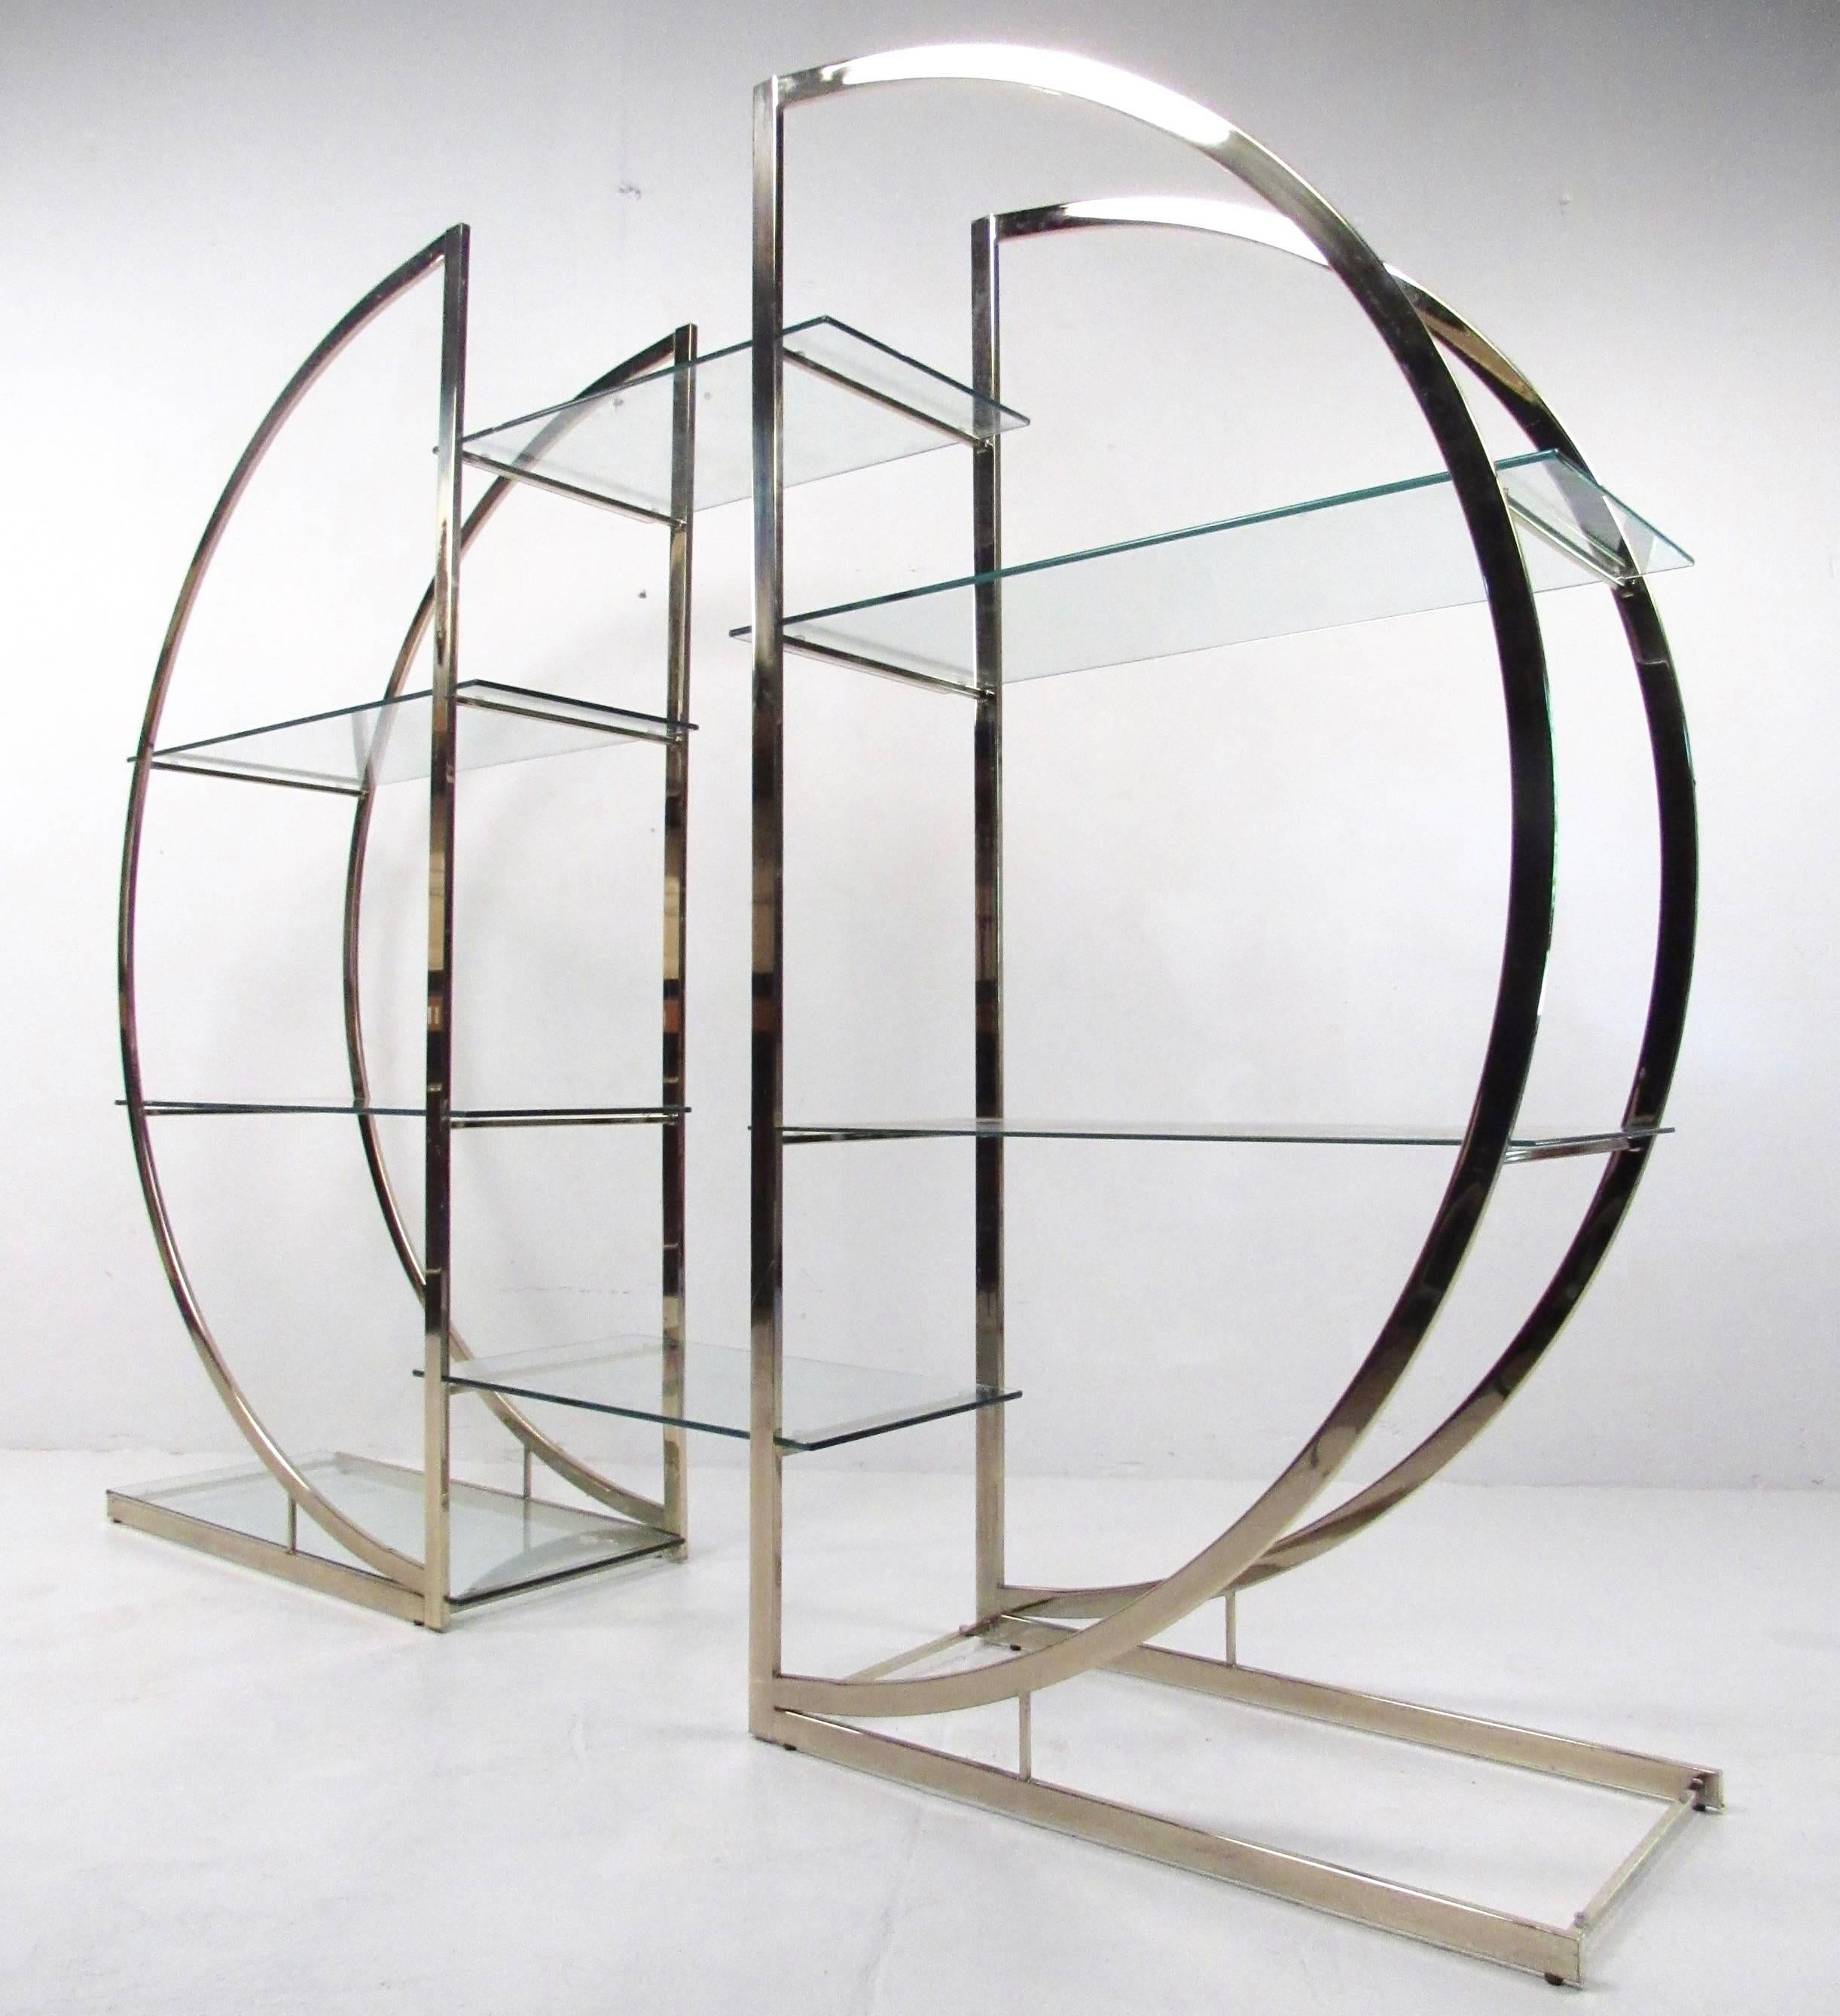 This stunning vintage etagere features a unique six shelf display that can be arranged to your optimal specifications. Unique mid-century design by Milo Baughman makes this a beautiful addition to any interior, whether for home storage or shop